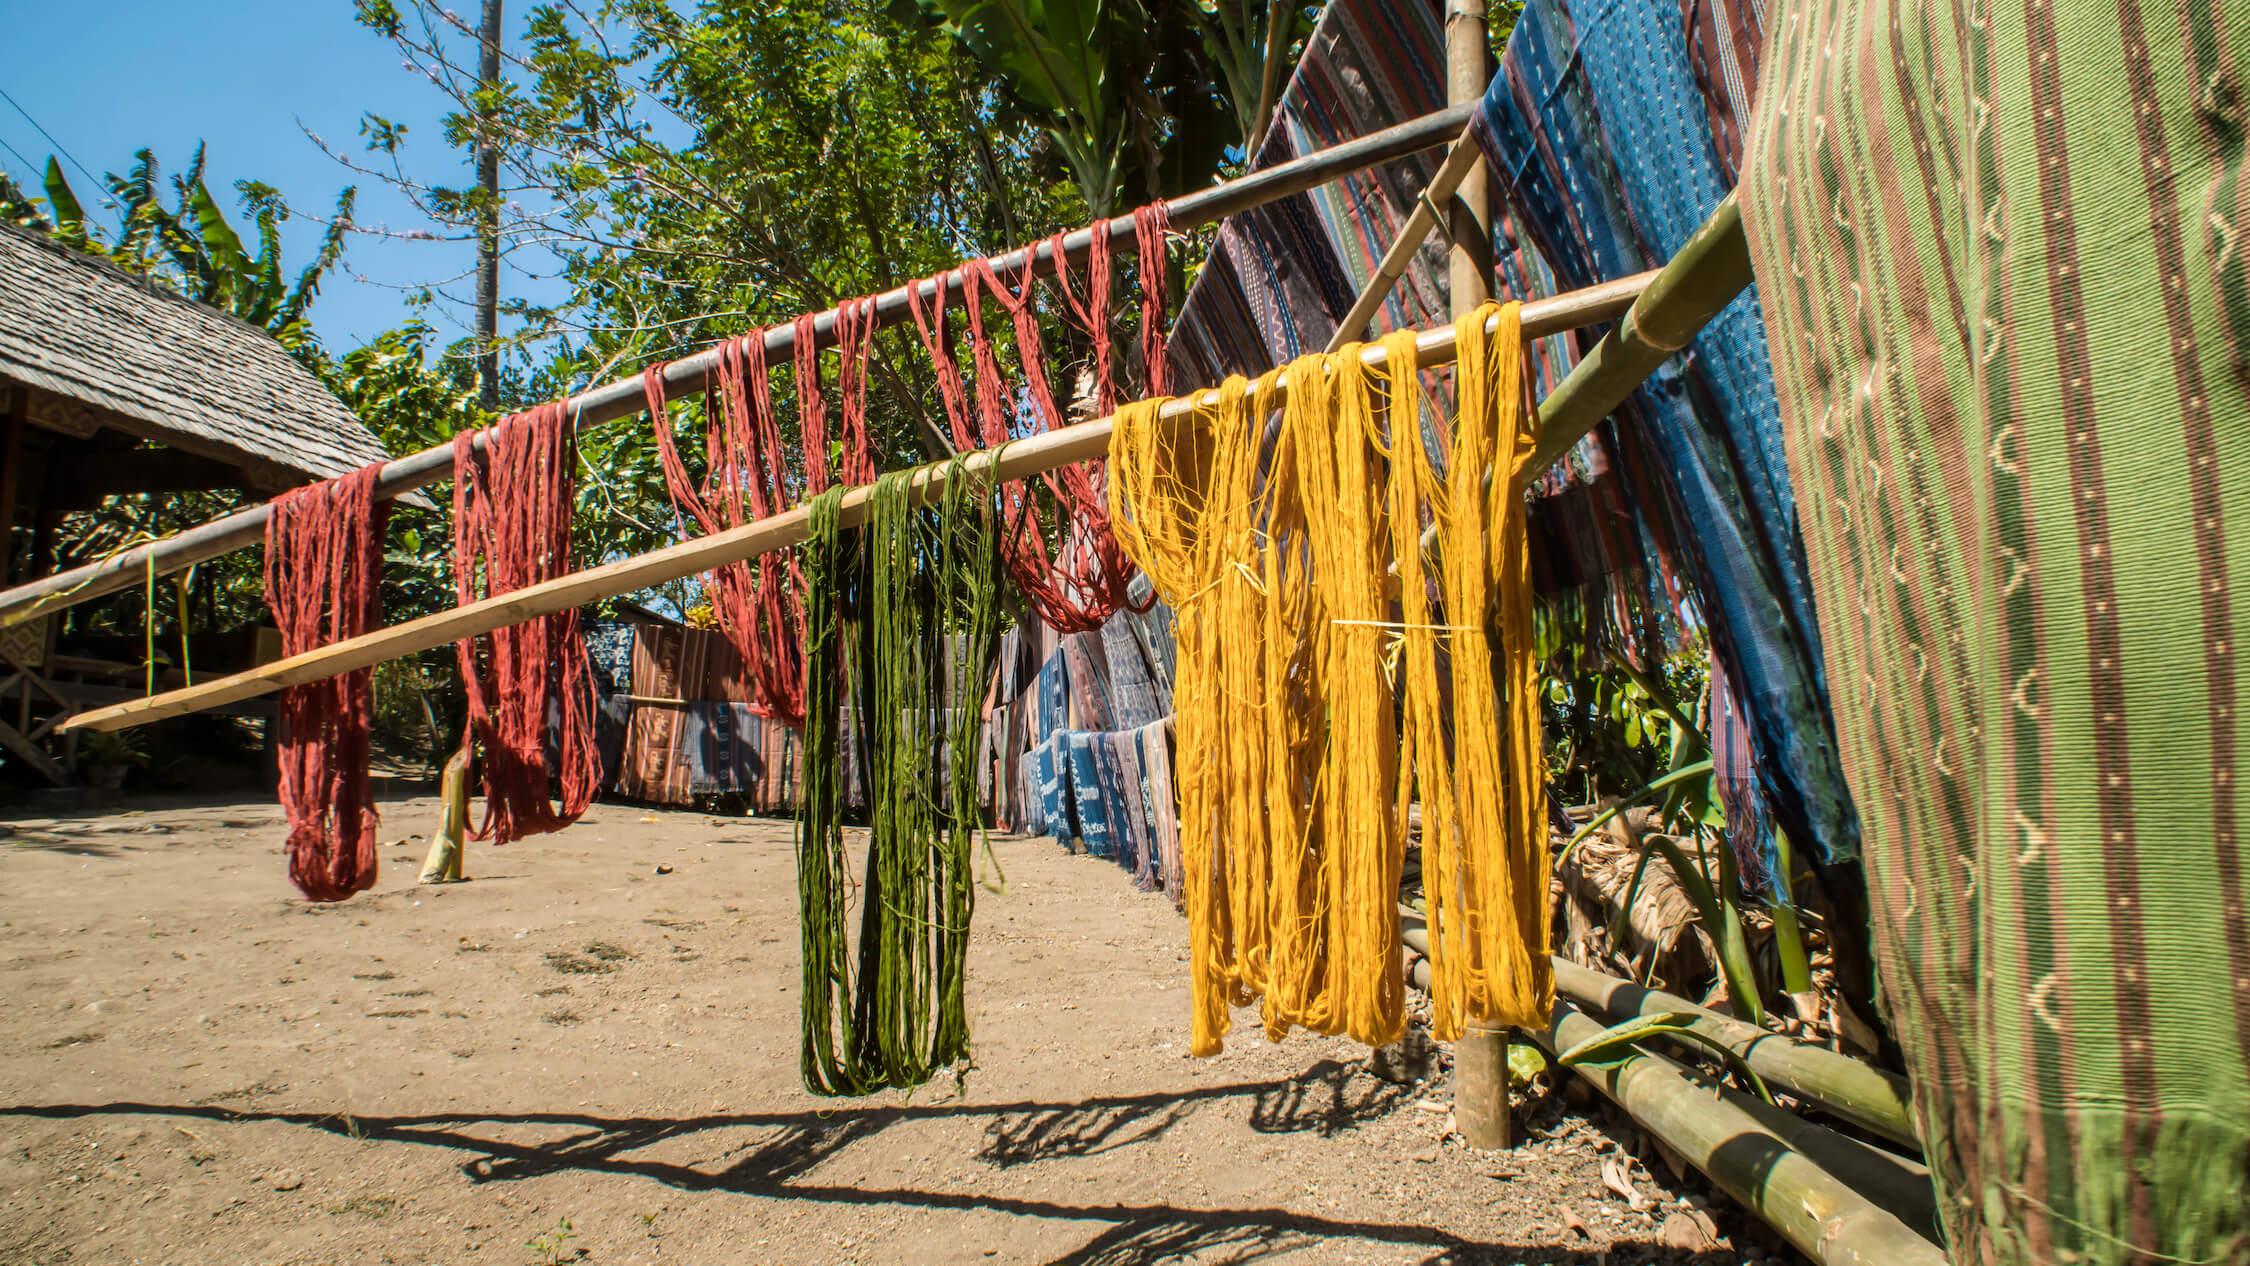 Dyed threads are sun-dried prior to weaving. These resist-free threads do not bear any ikat motif and are typically used for weaving solid colours or plain stripes. Photo by Andra Fembriarto